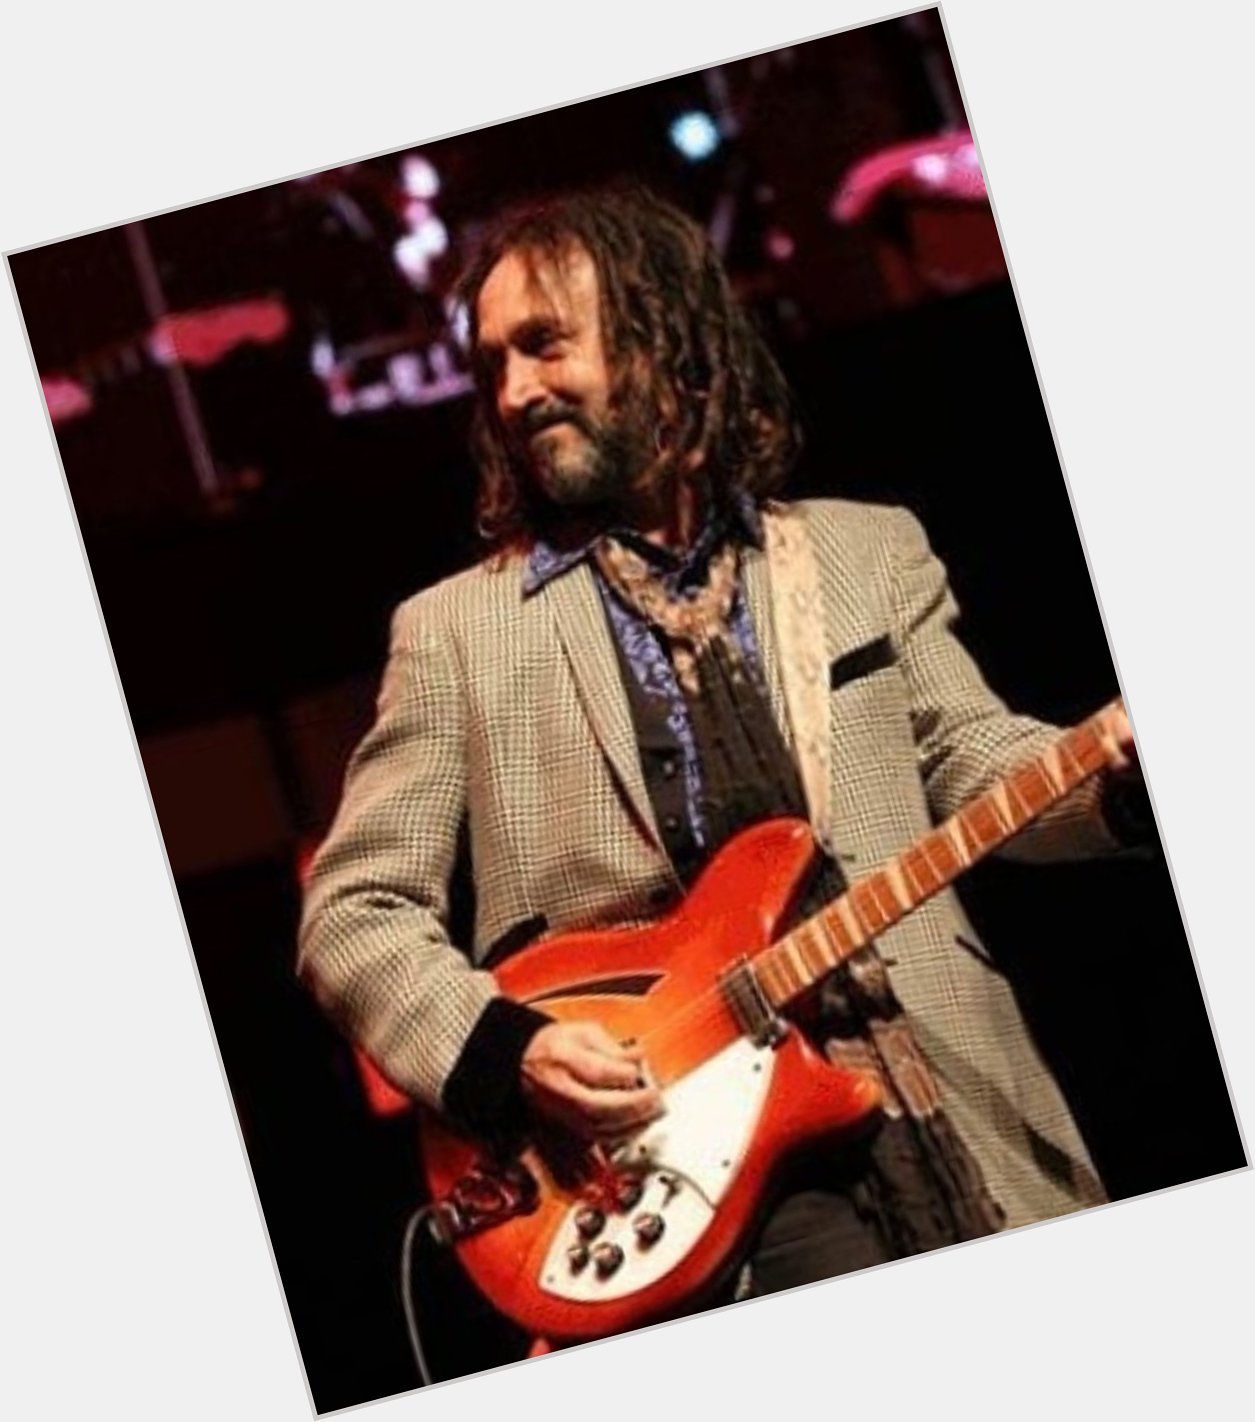 Happy birthday, Mike Campbell  